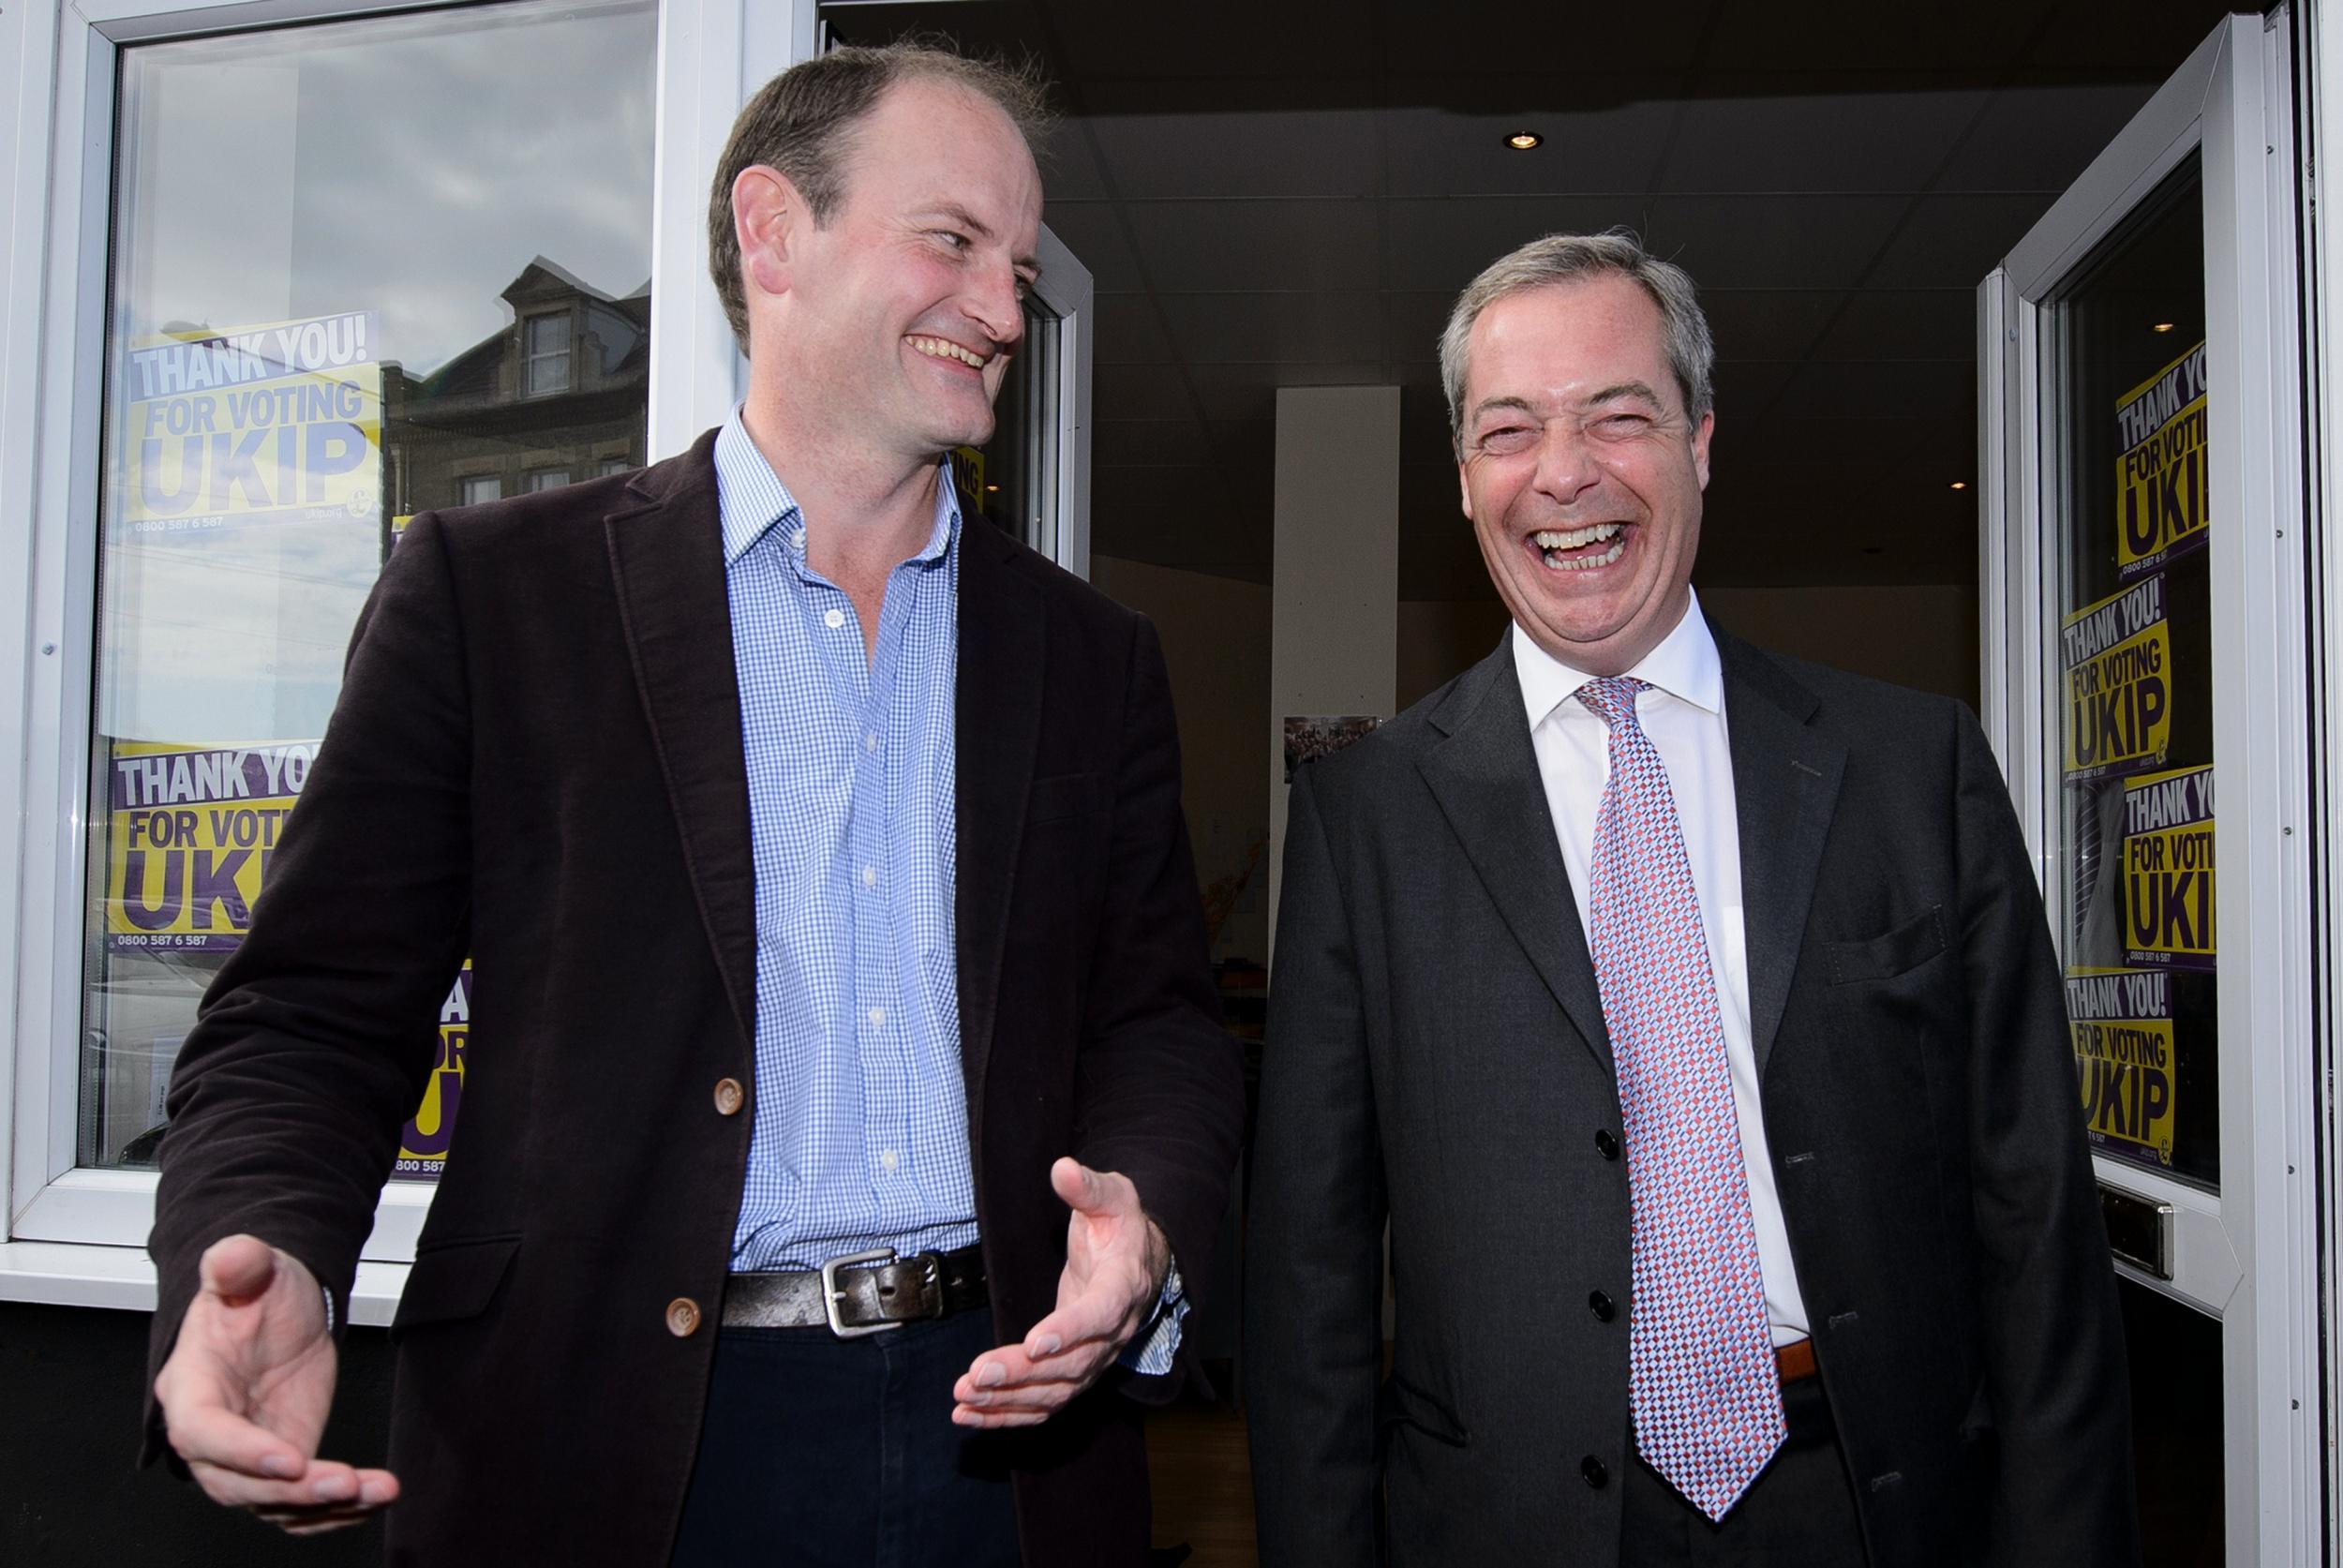 Ukip lost the Stoke by-election and now face a similar question to Donald Trump in office: how mainstream should an insurgent become?